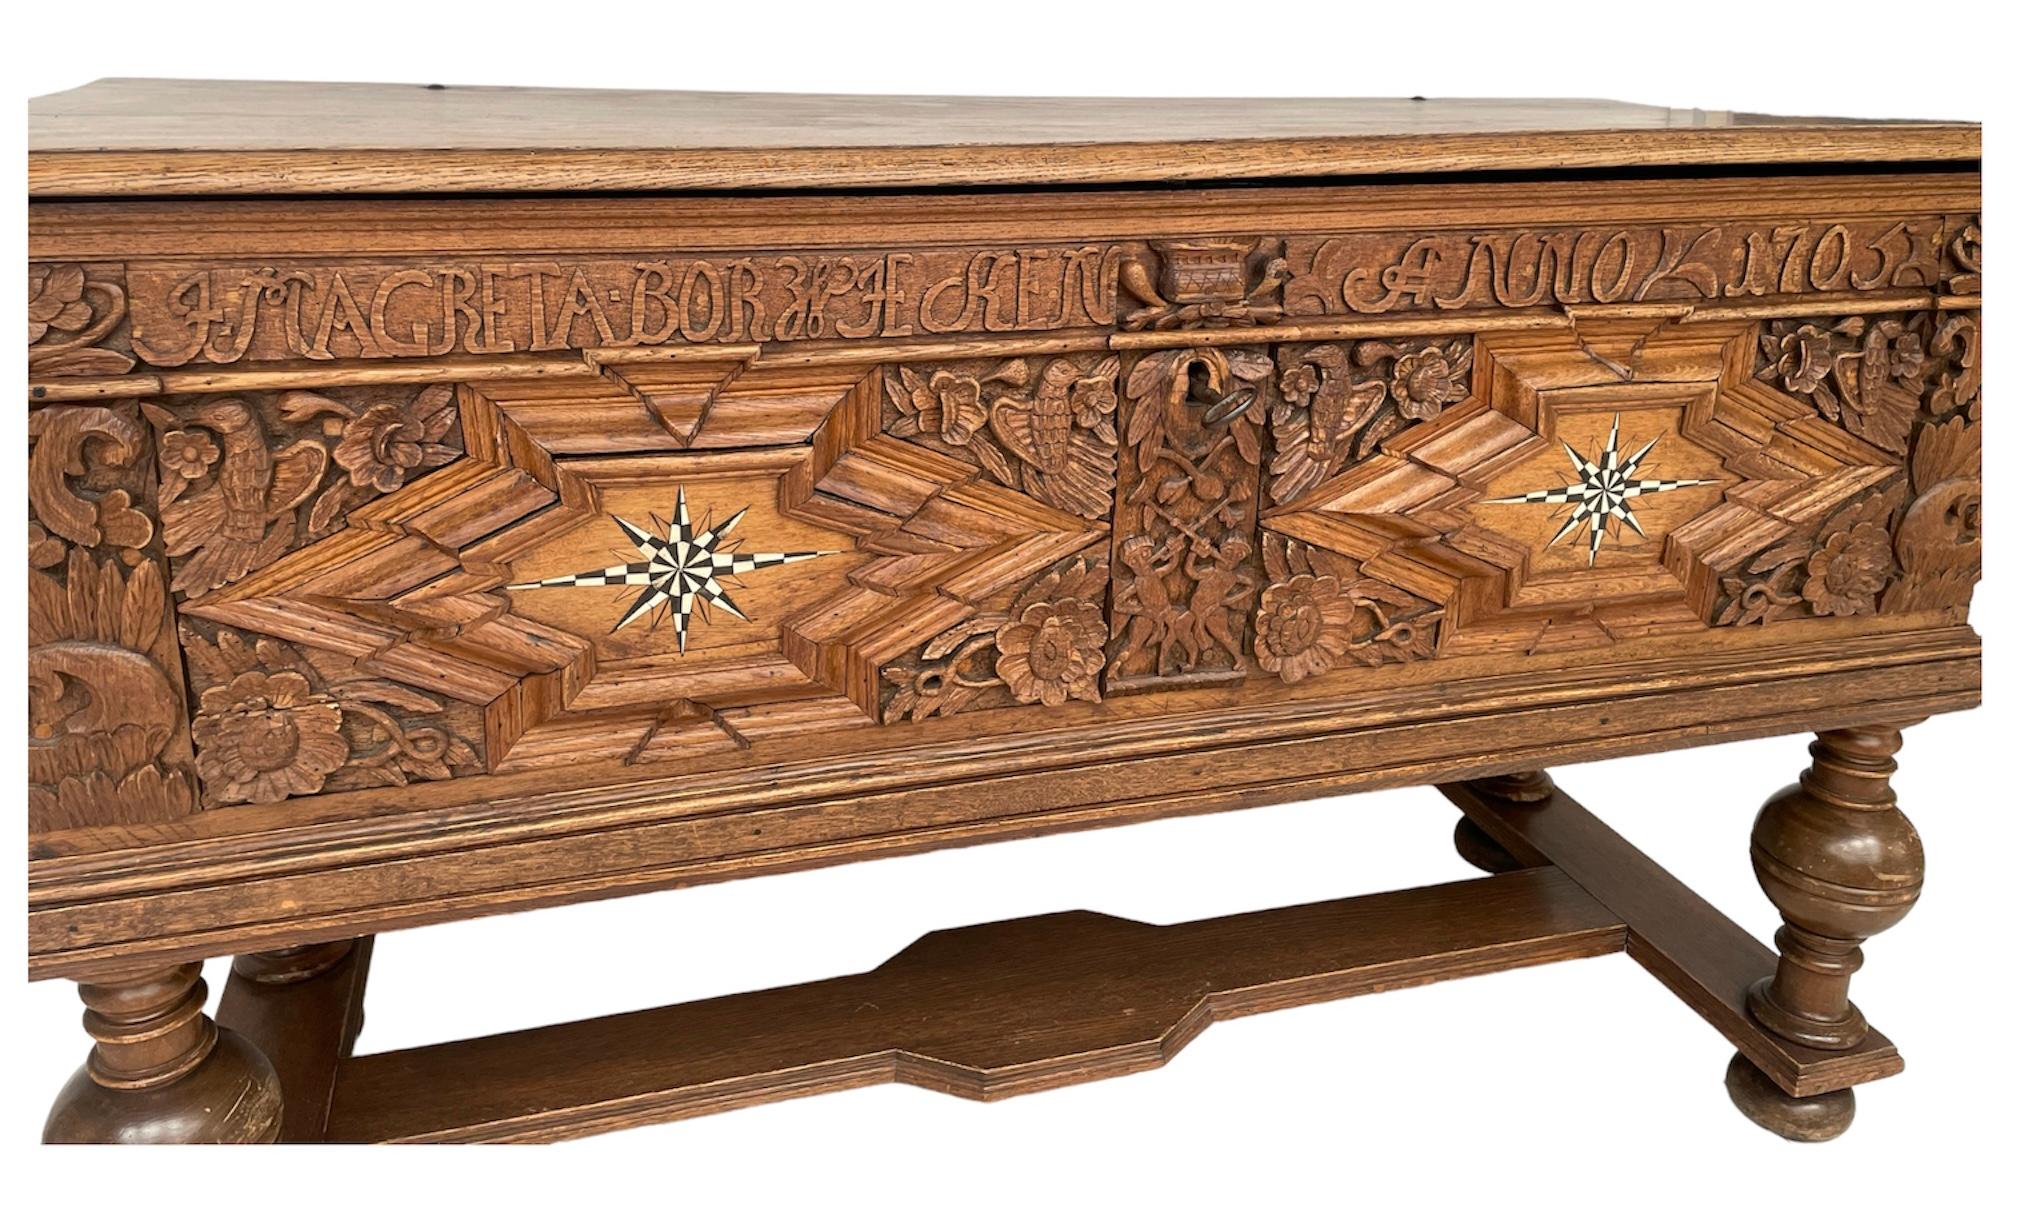 Beautiful hand-detailed table from the 18th century from Spain.